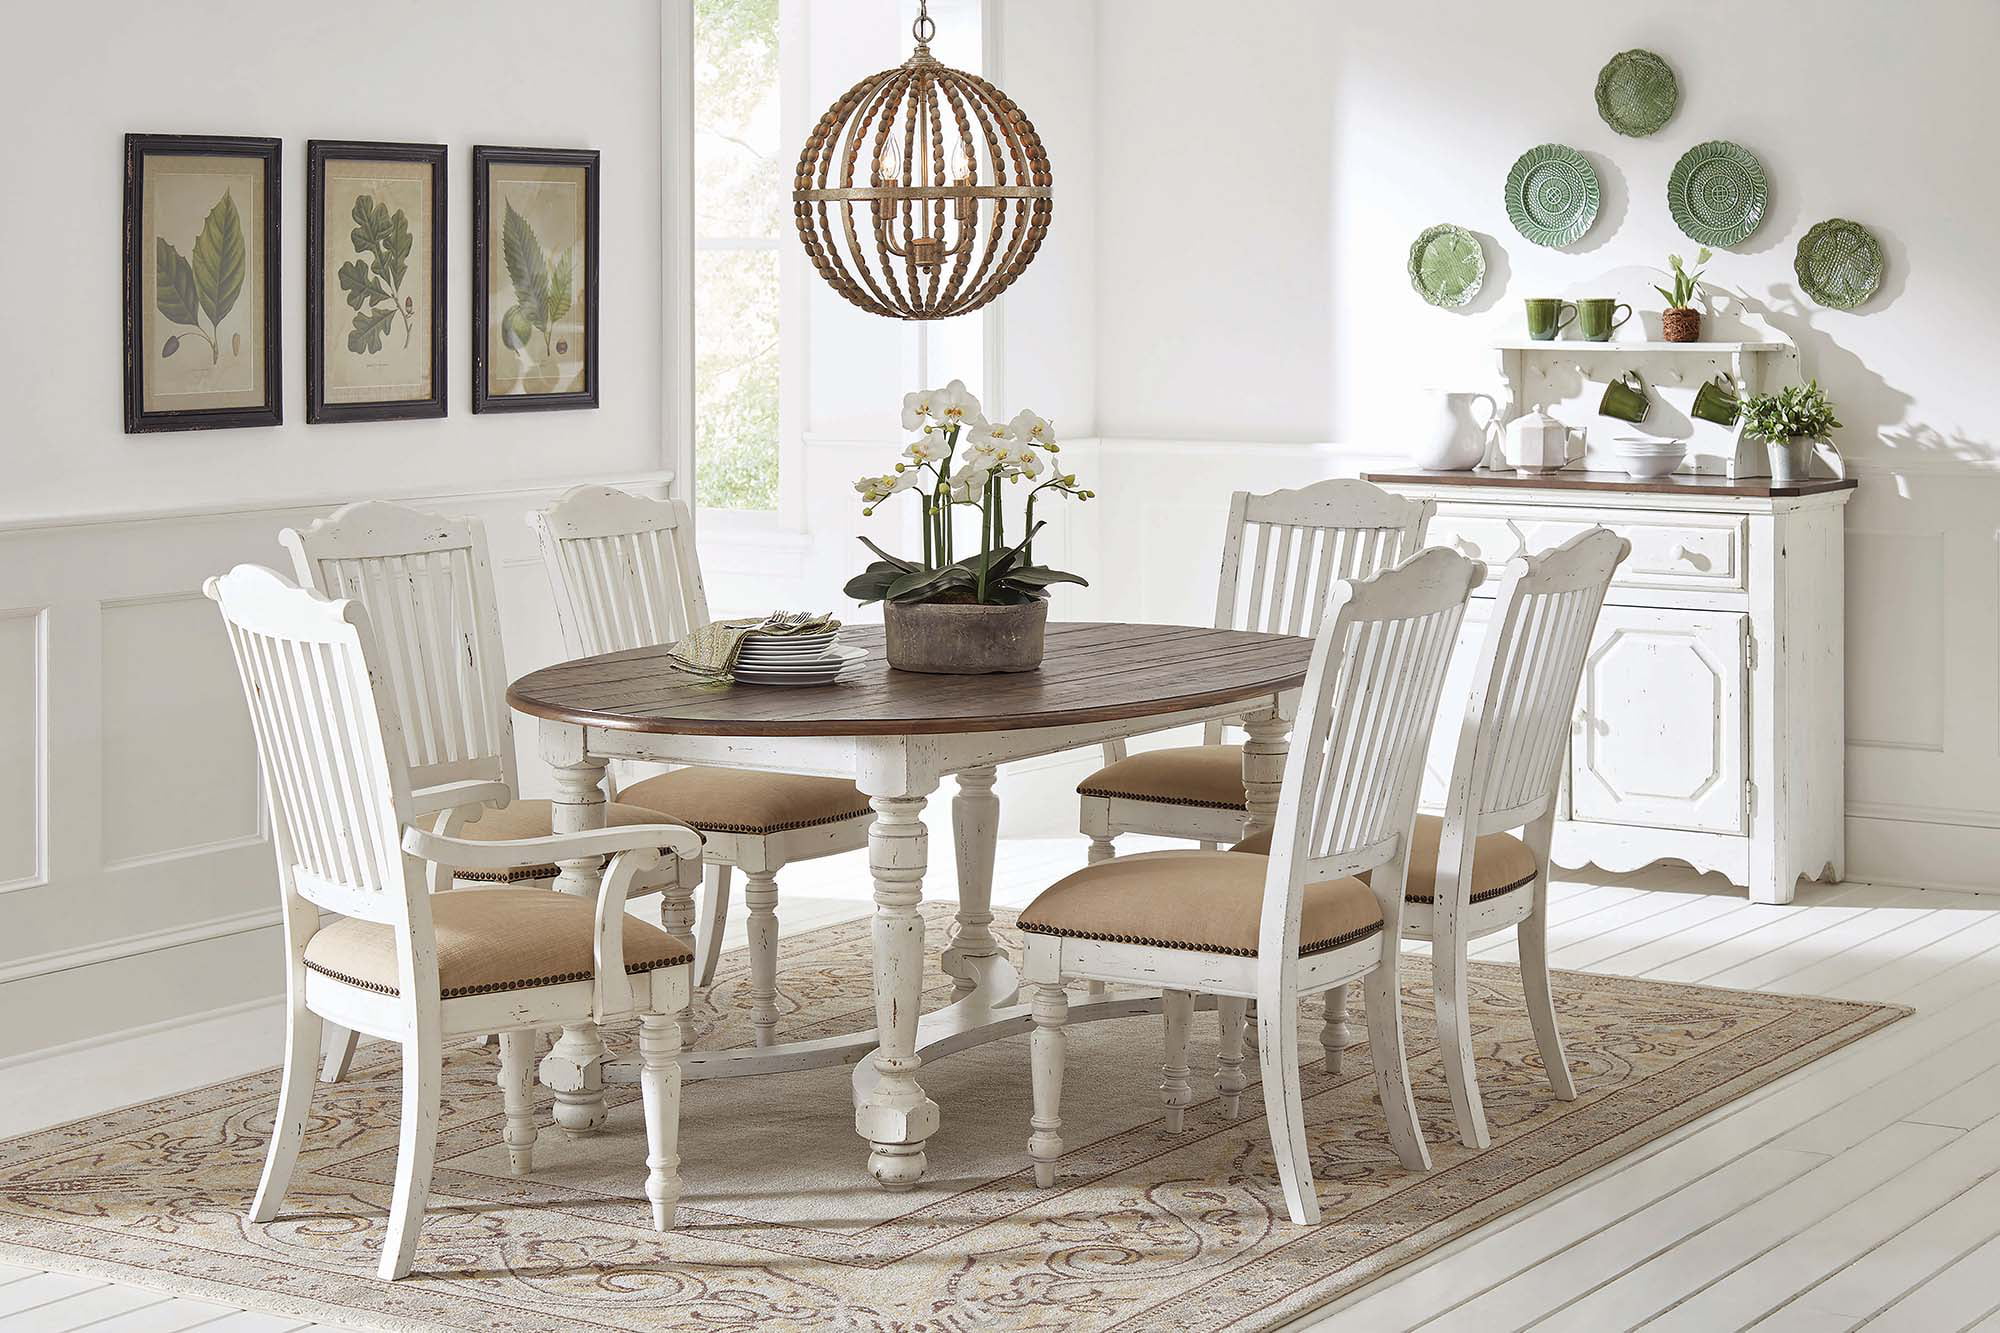 Simpson 5 Piece Oval Table Dining Set, Country Style Dining Room Set